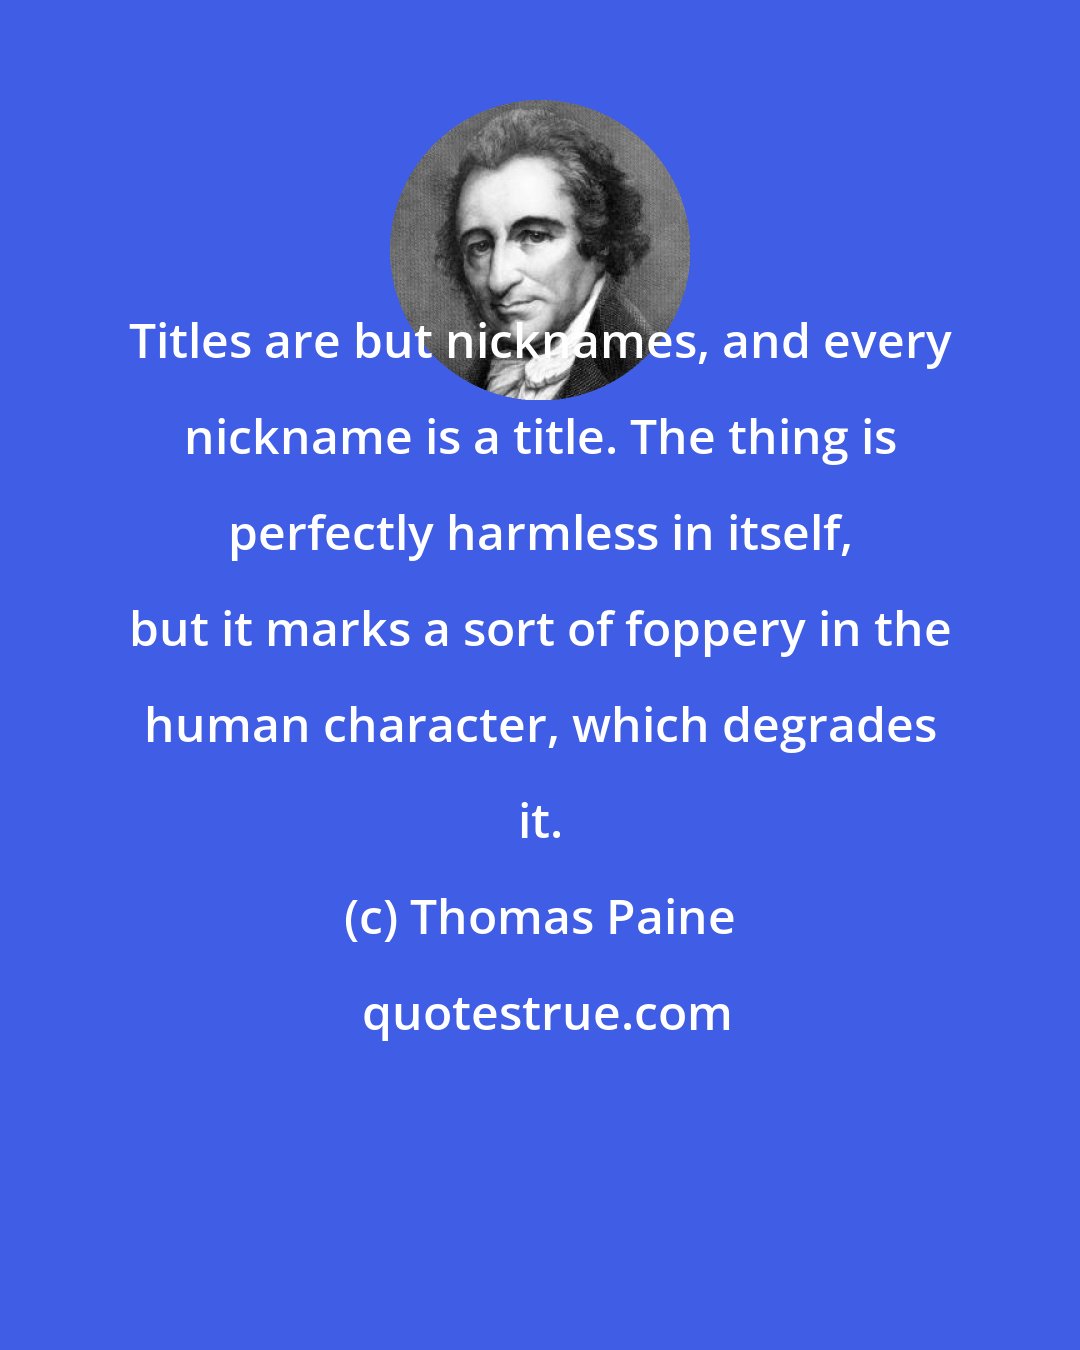 Thomas Paine: Titles are but nicknames, and every nickname is a title. The thing is perfectly harmless in itself, but it marks a sort of foppery in the human character, which degrades it.